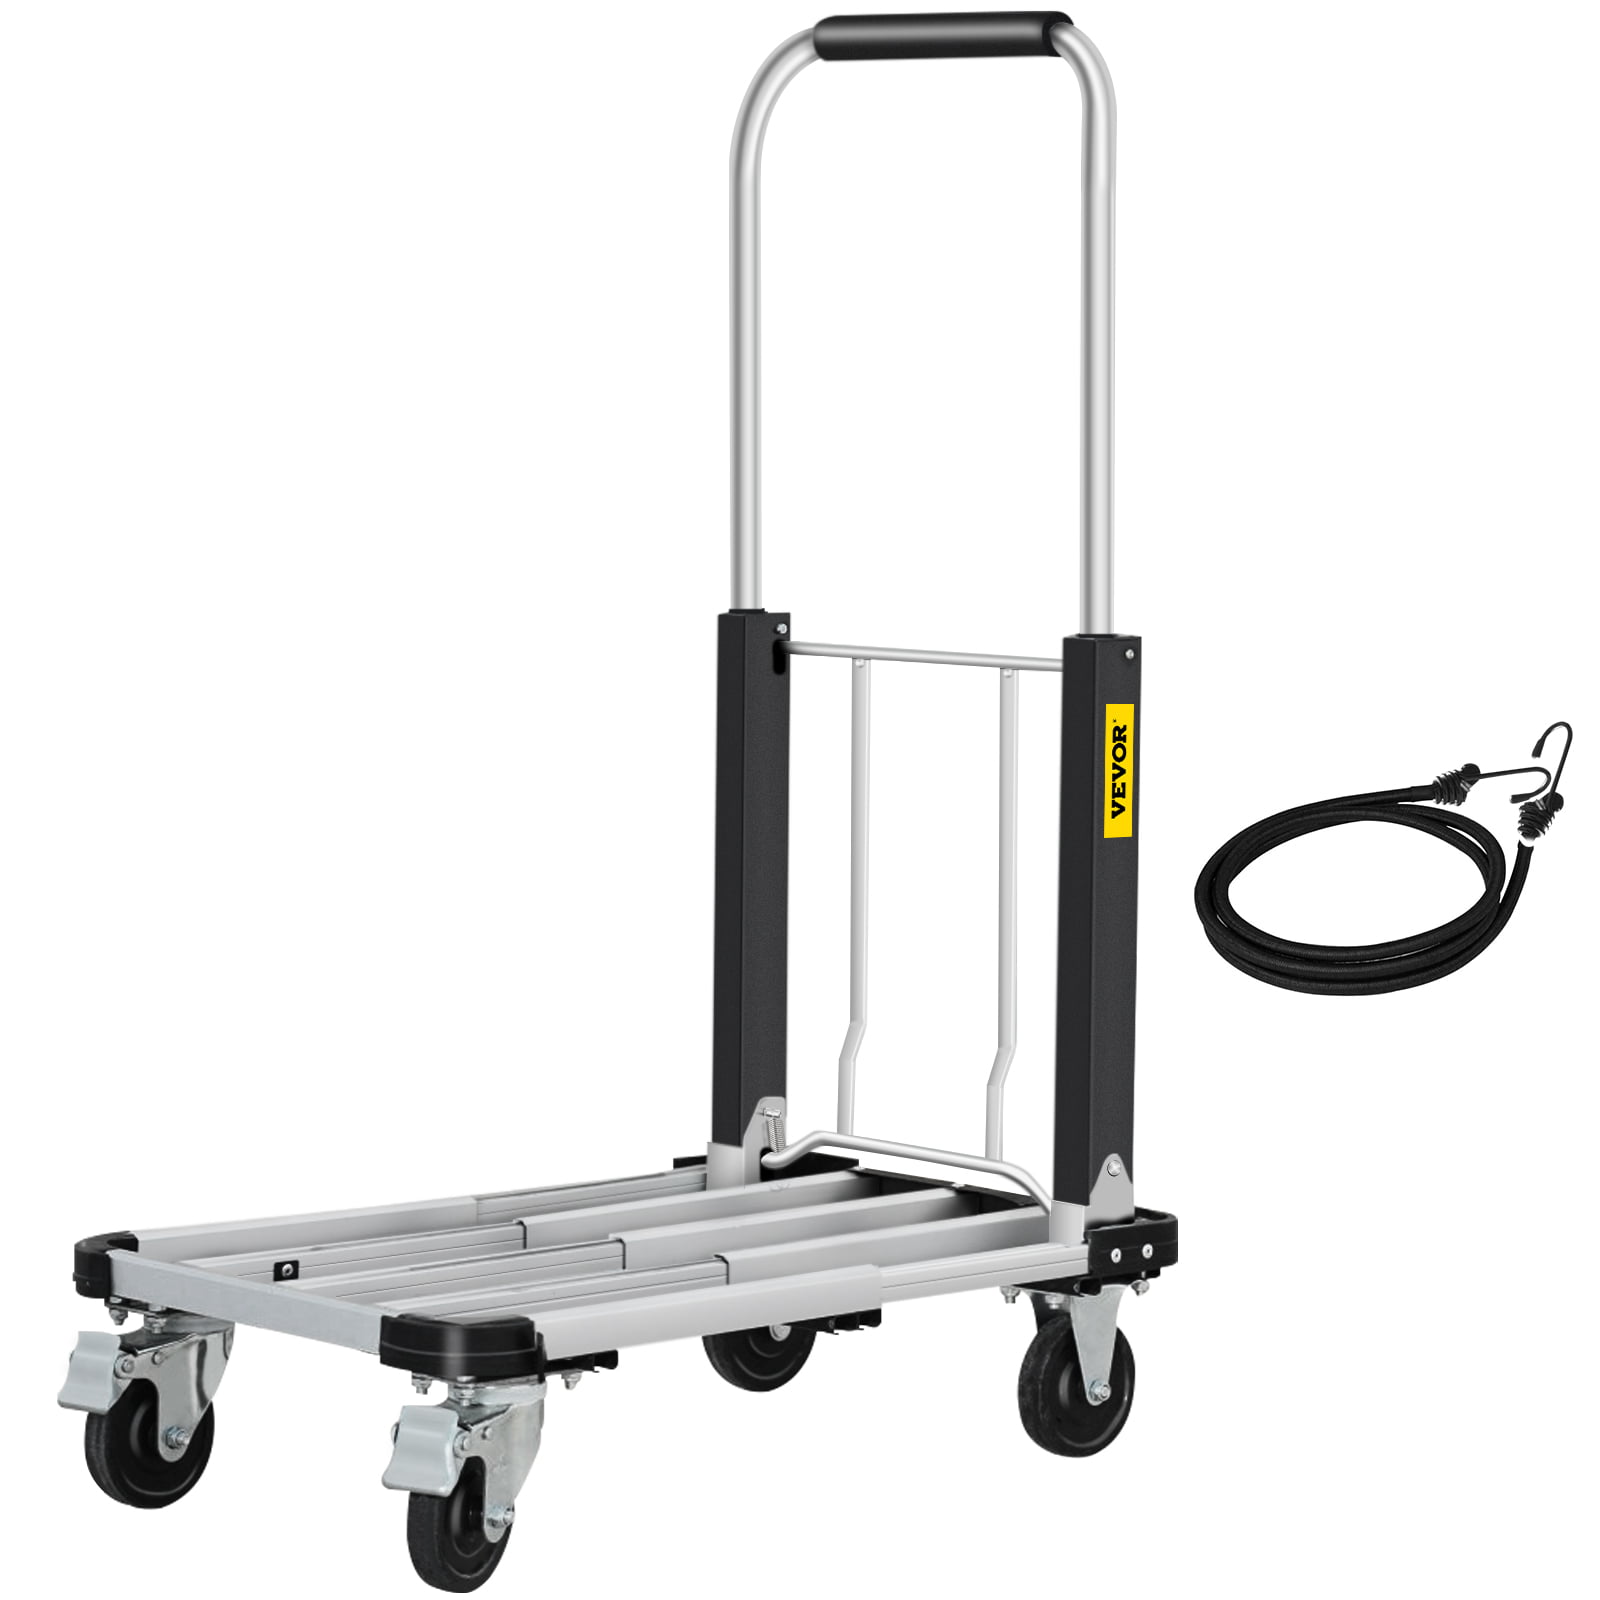 Details about   New,Portable,Mini,Folding,Moving,330lbs,Platform,Dolly,Luggage,Hand,Trolly,Truck 